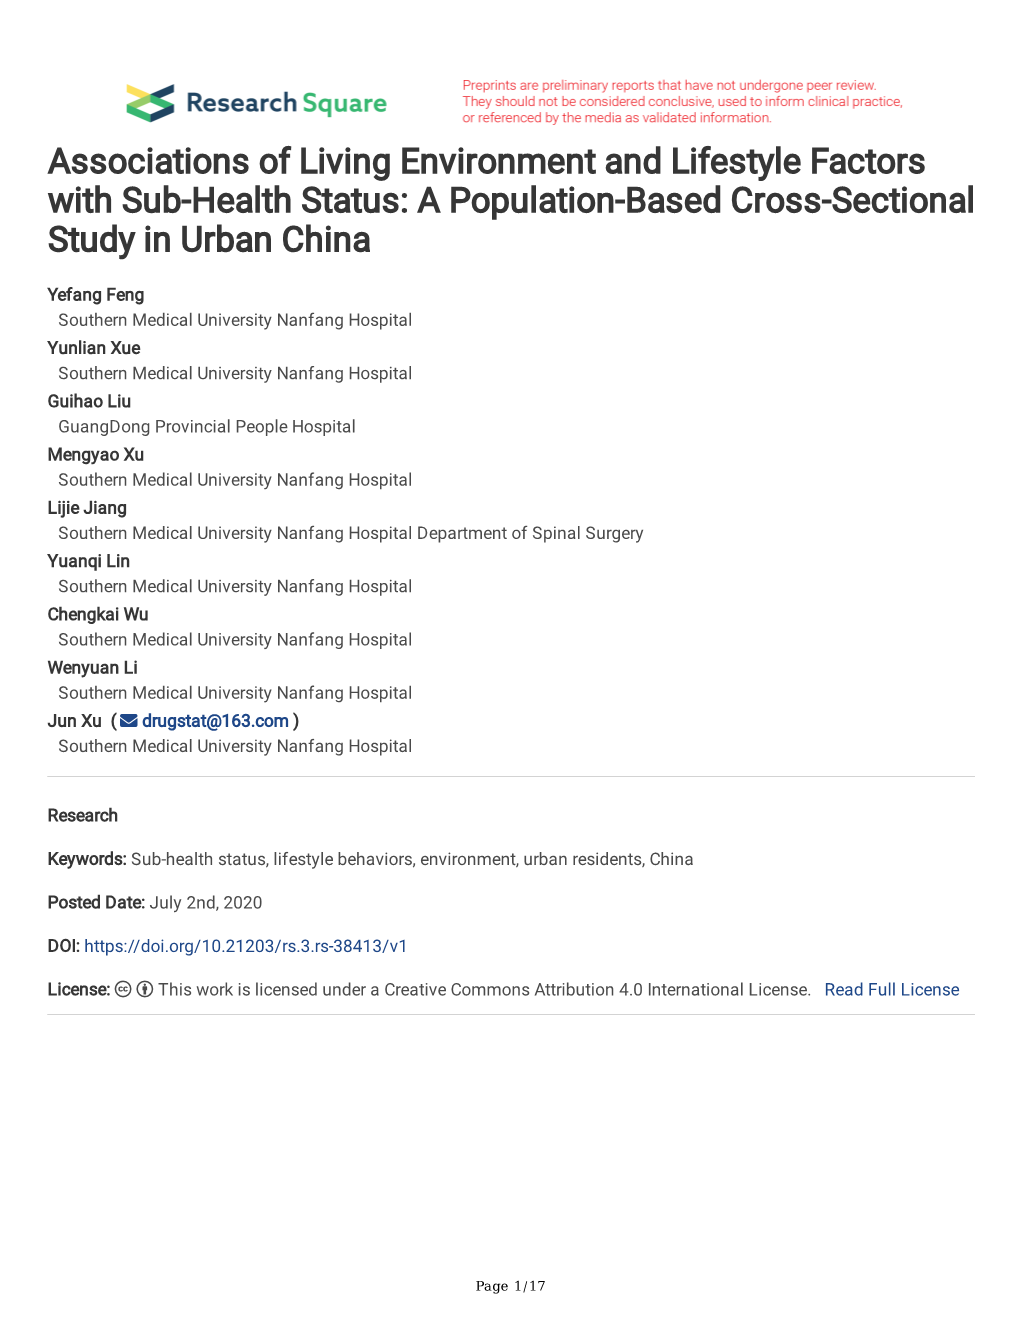 Associations of Living Environment and Lifestyle Factors with Sub-Health Status: a Population-Based Cross-Sectional Study in Urban China